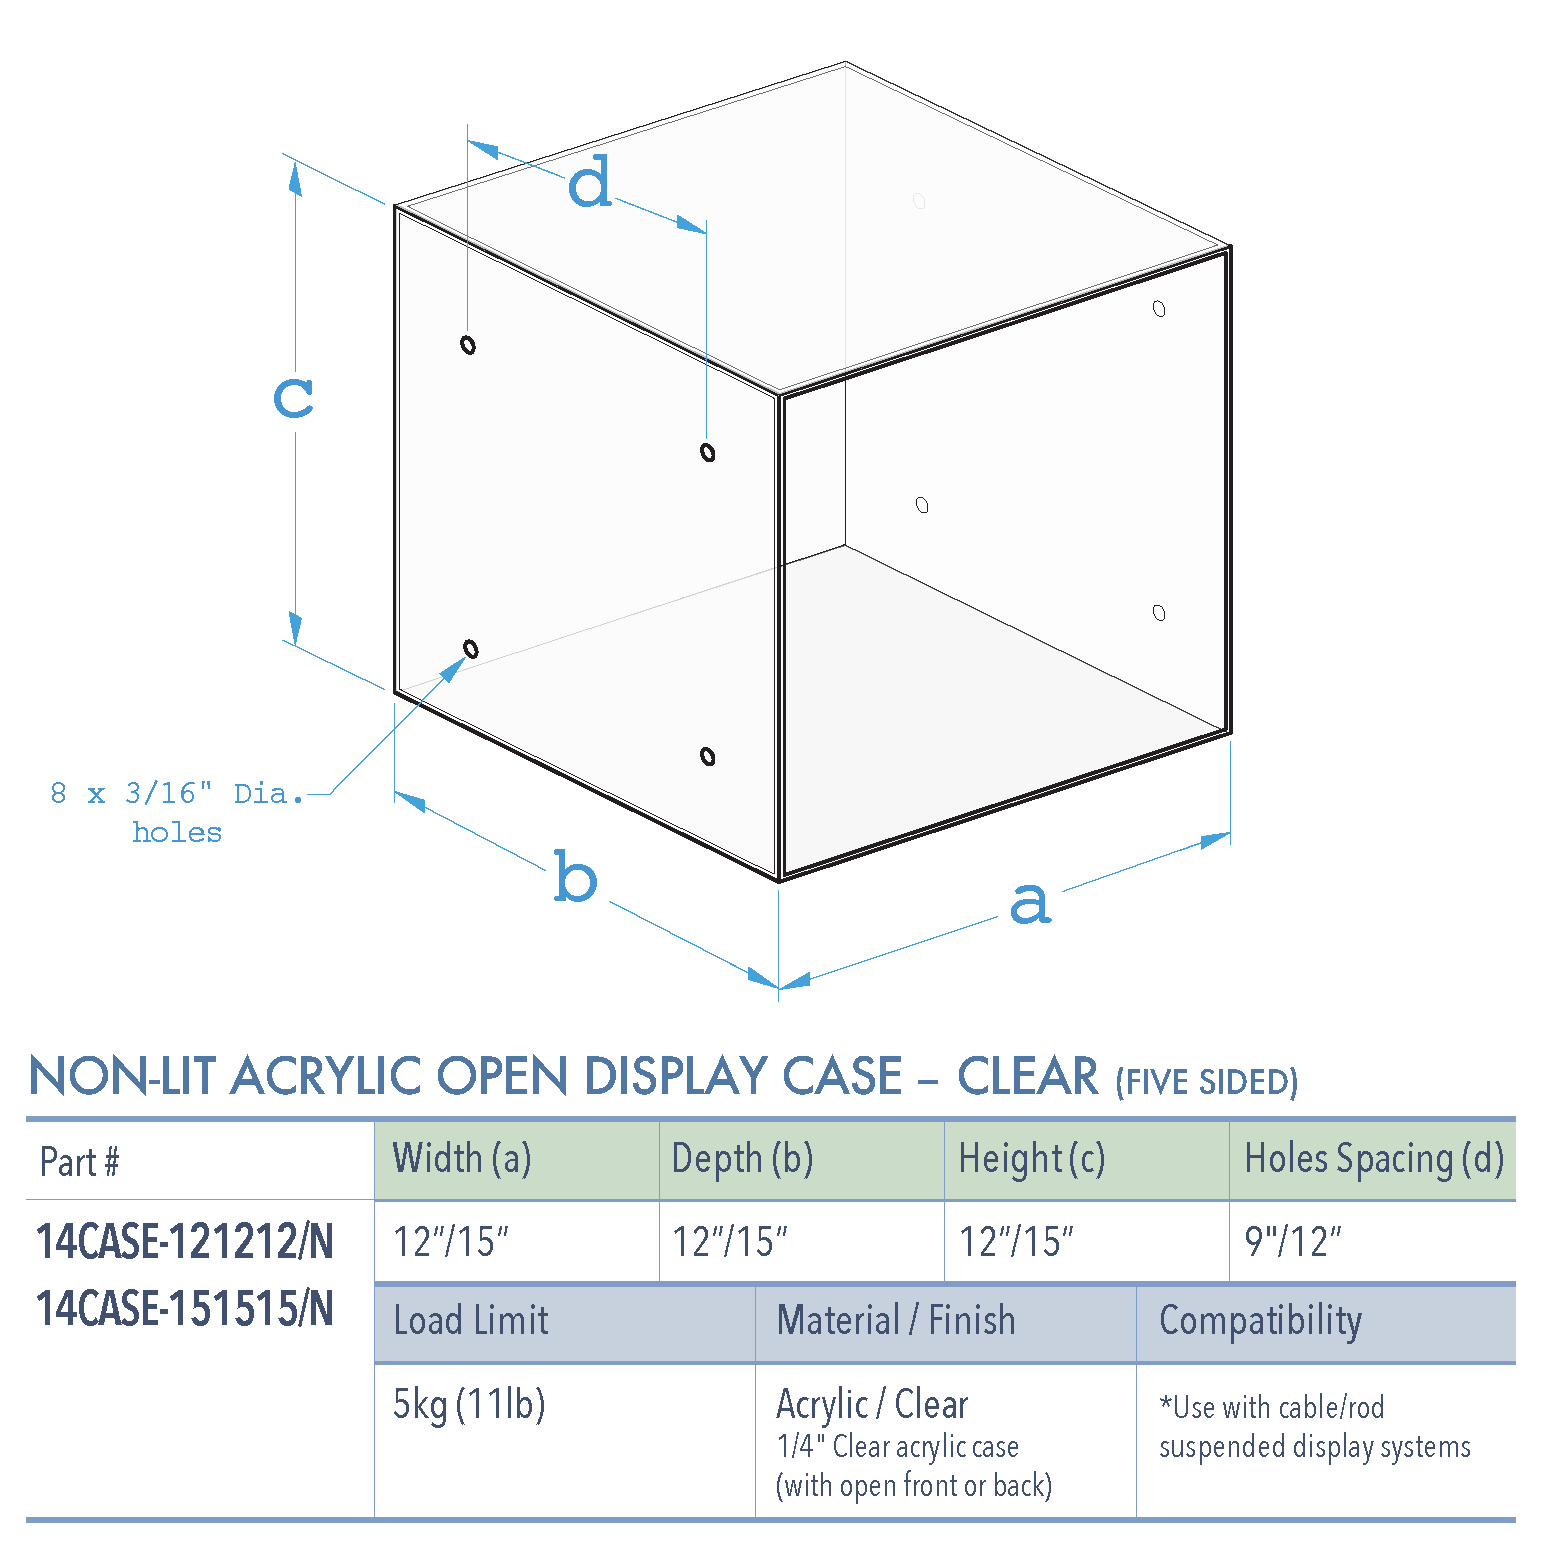 Specifications for 14CASE-CLEAR-OPEN